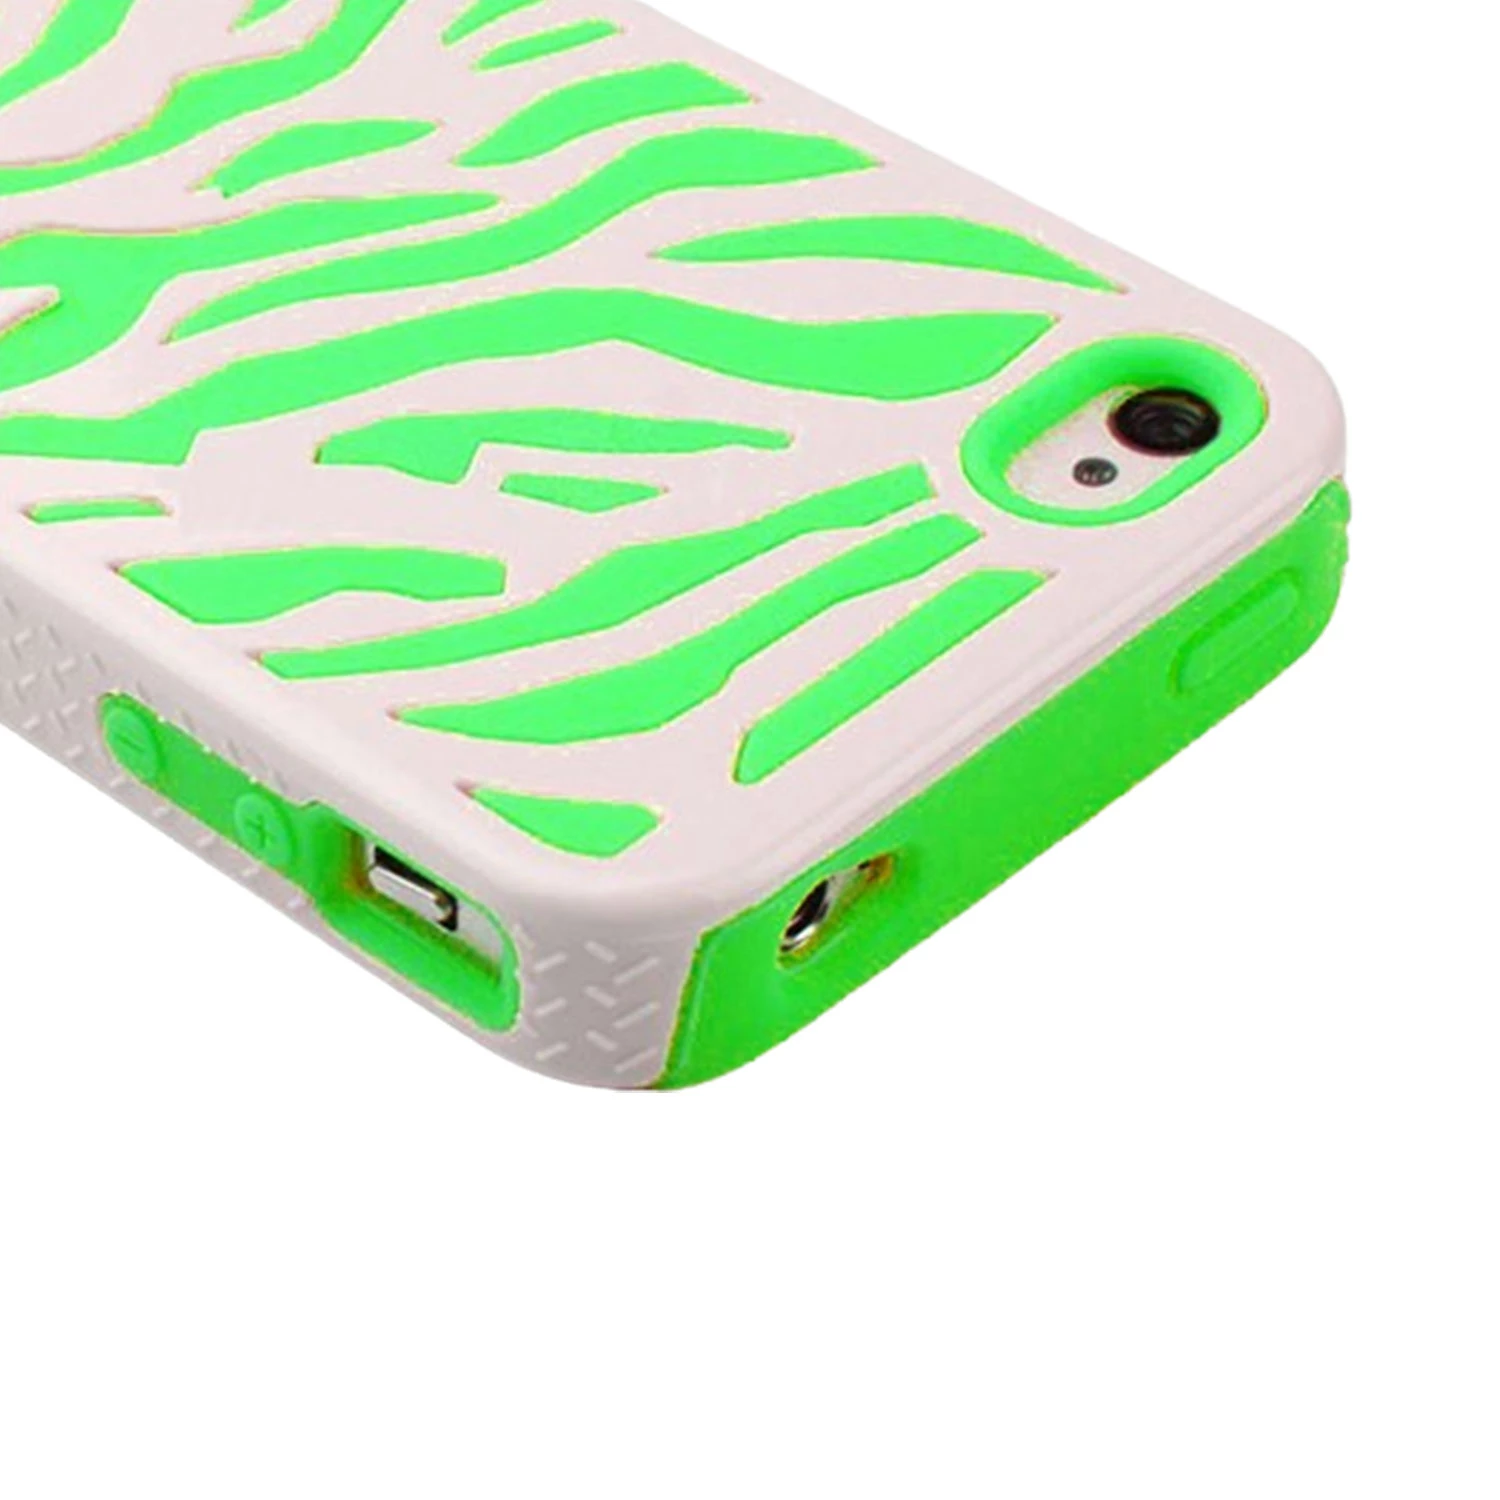 Zebra Combo Hard Soft Case Cover  For iPhone 4 4S Silicone Armor Case